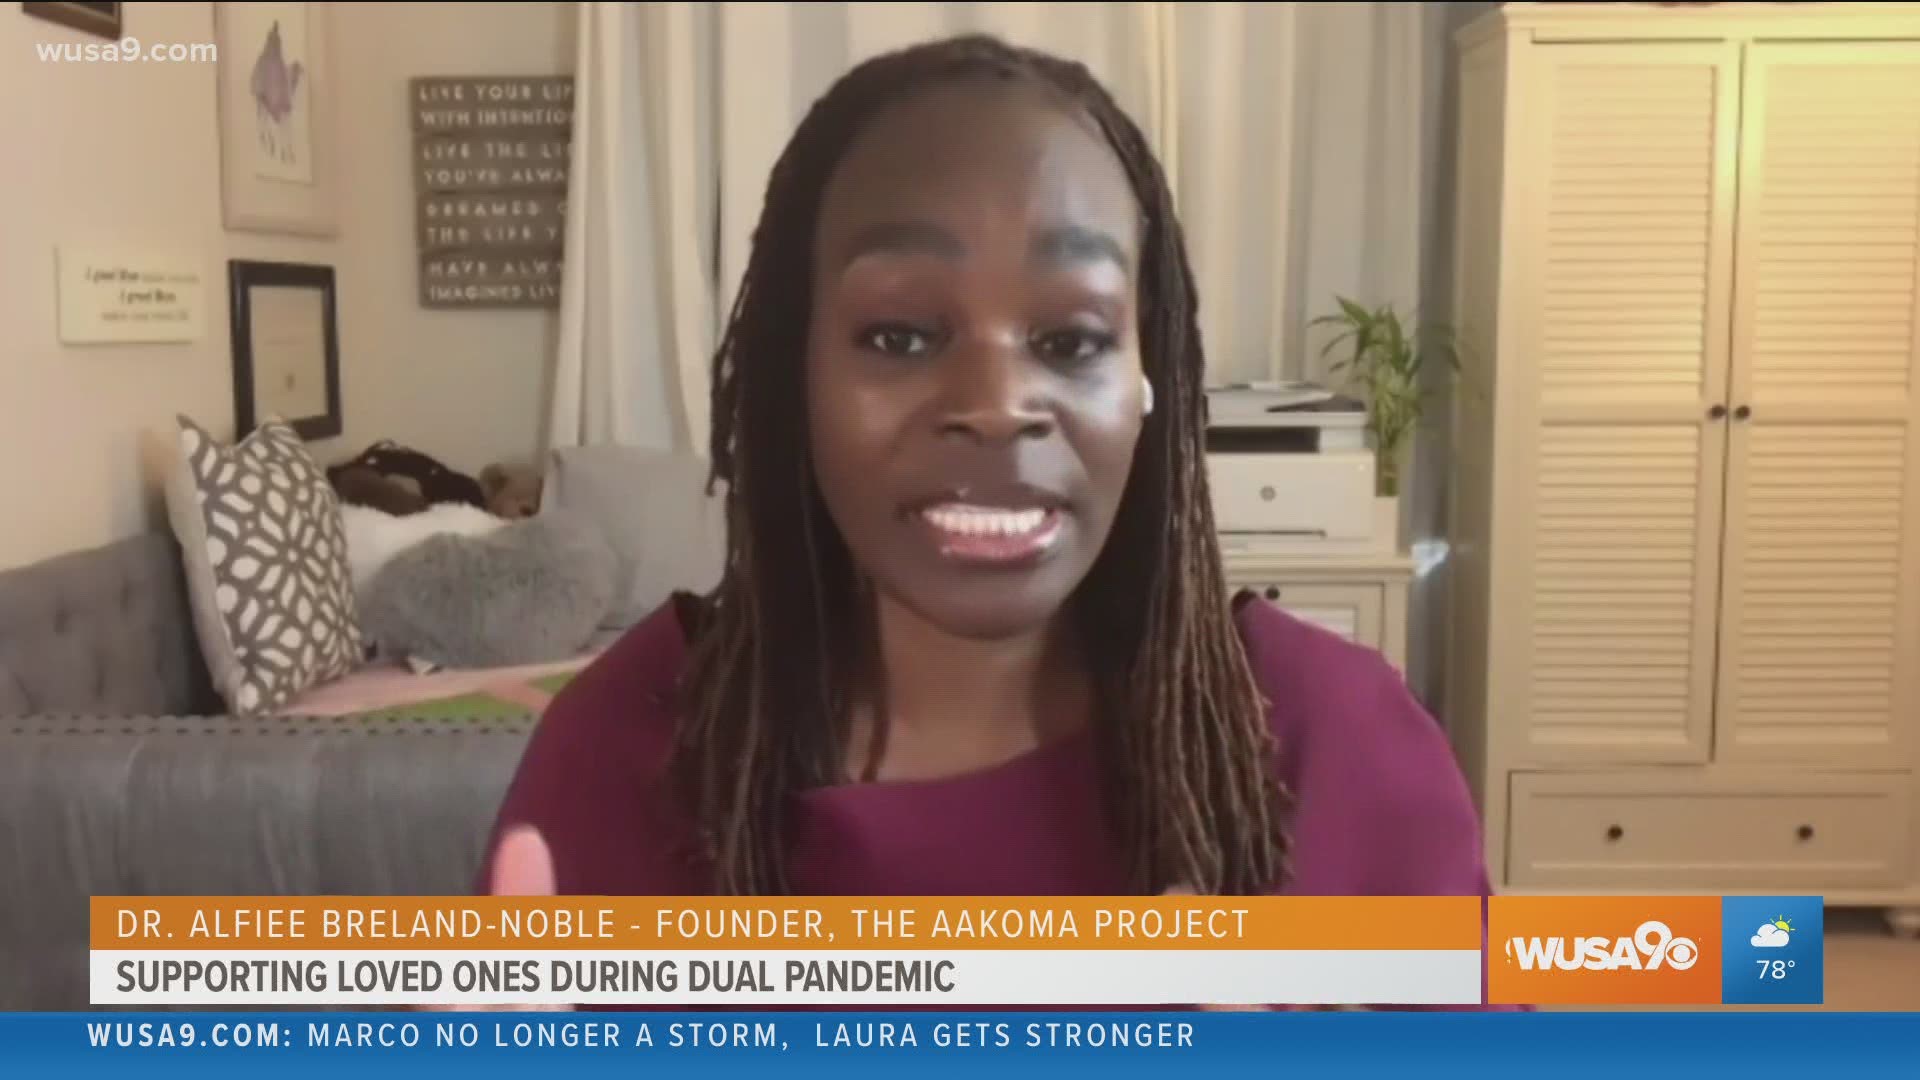 Dr. Alfiee Breland-Noble, Founder of the Aakoma Project, shares how to deal with emotional stress during a dual pandemic.